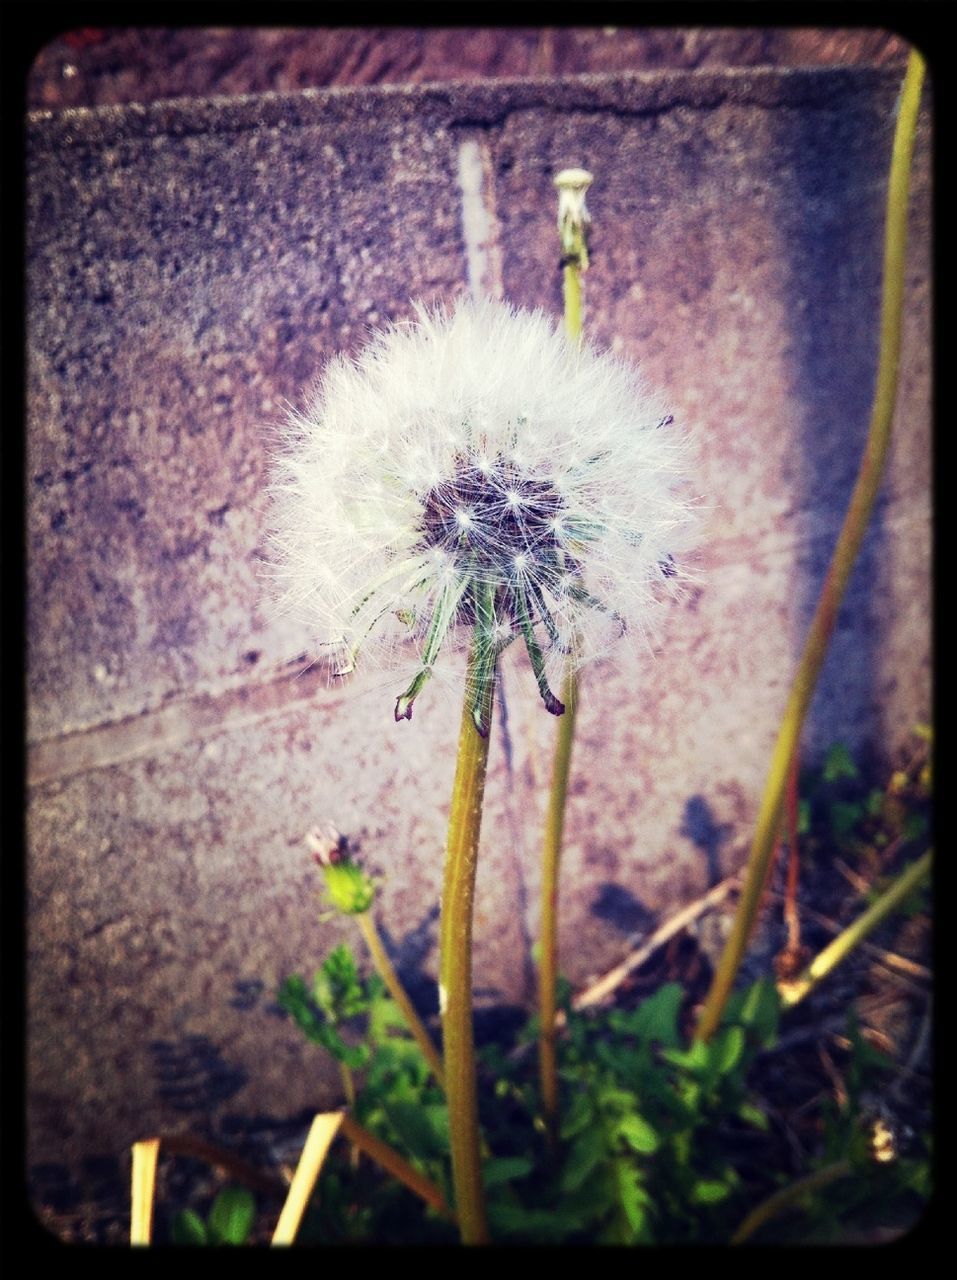 flower, fragility, growth, dandelion, flower head, transfer print, auto post production filter, close-up, plant, freshness, nature, single flower, beauty in nature, stem, focus on foreground, day, outdoors, no people, blooming, wildflower